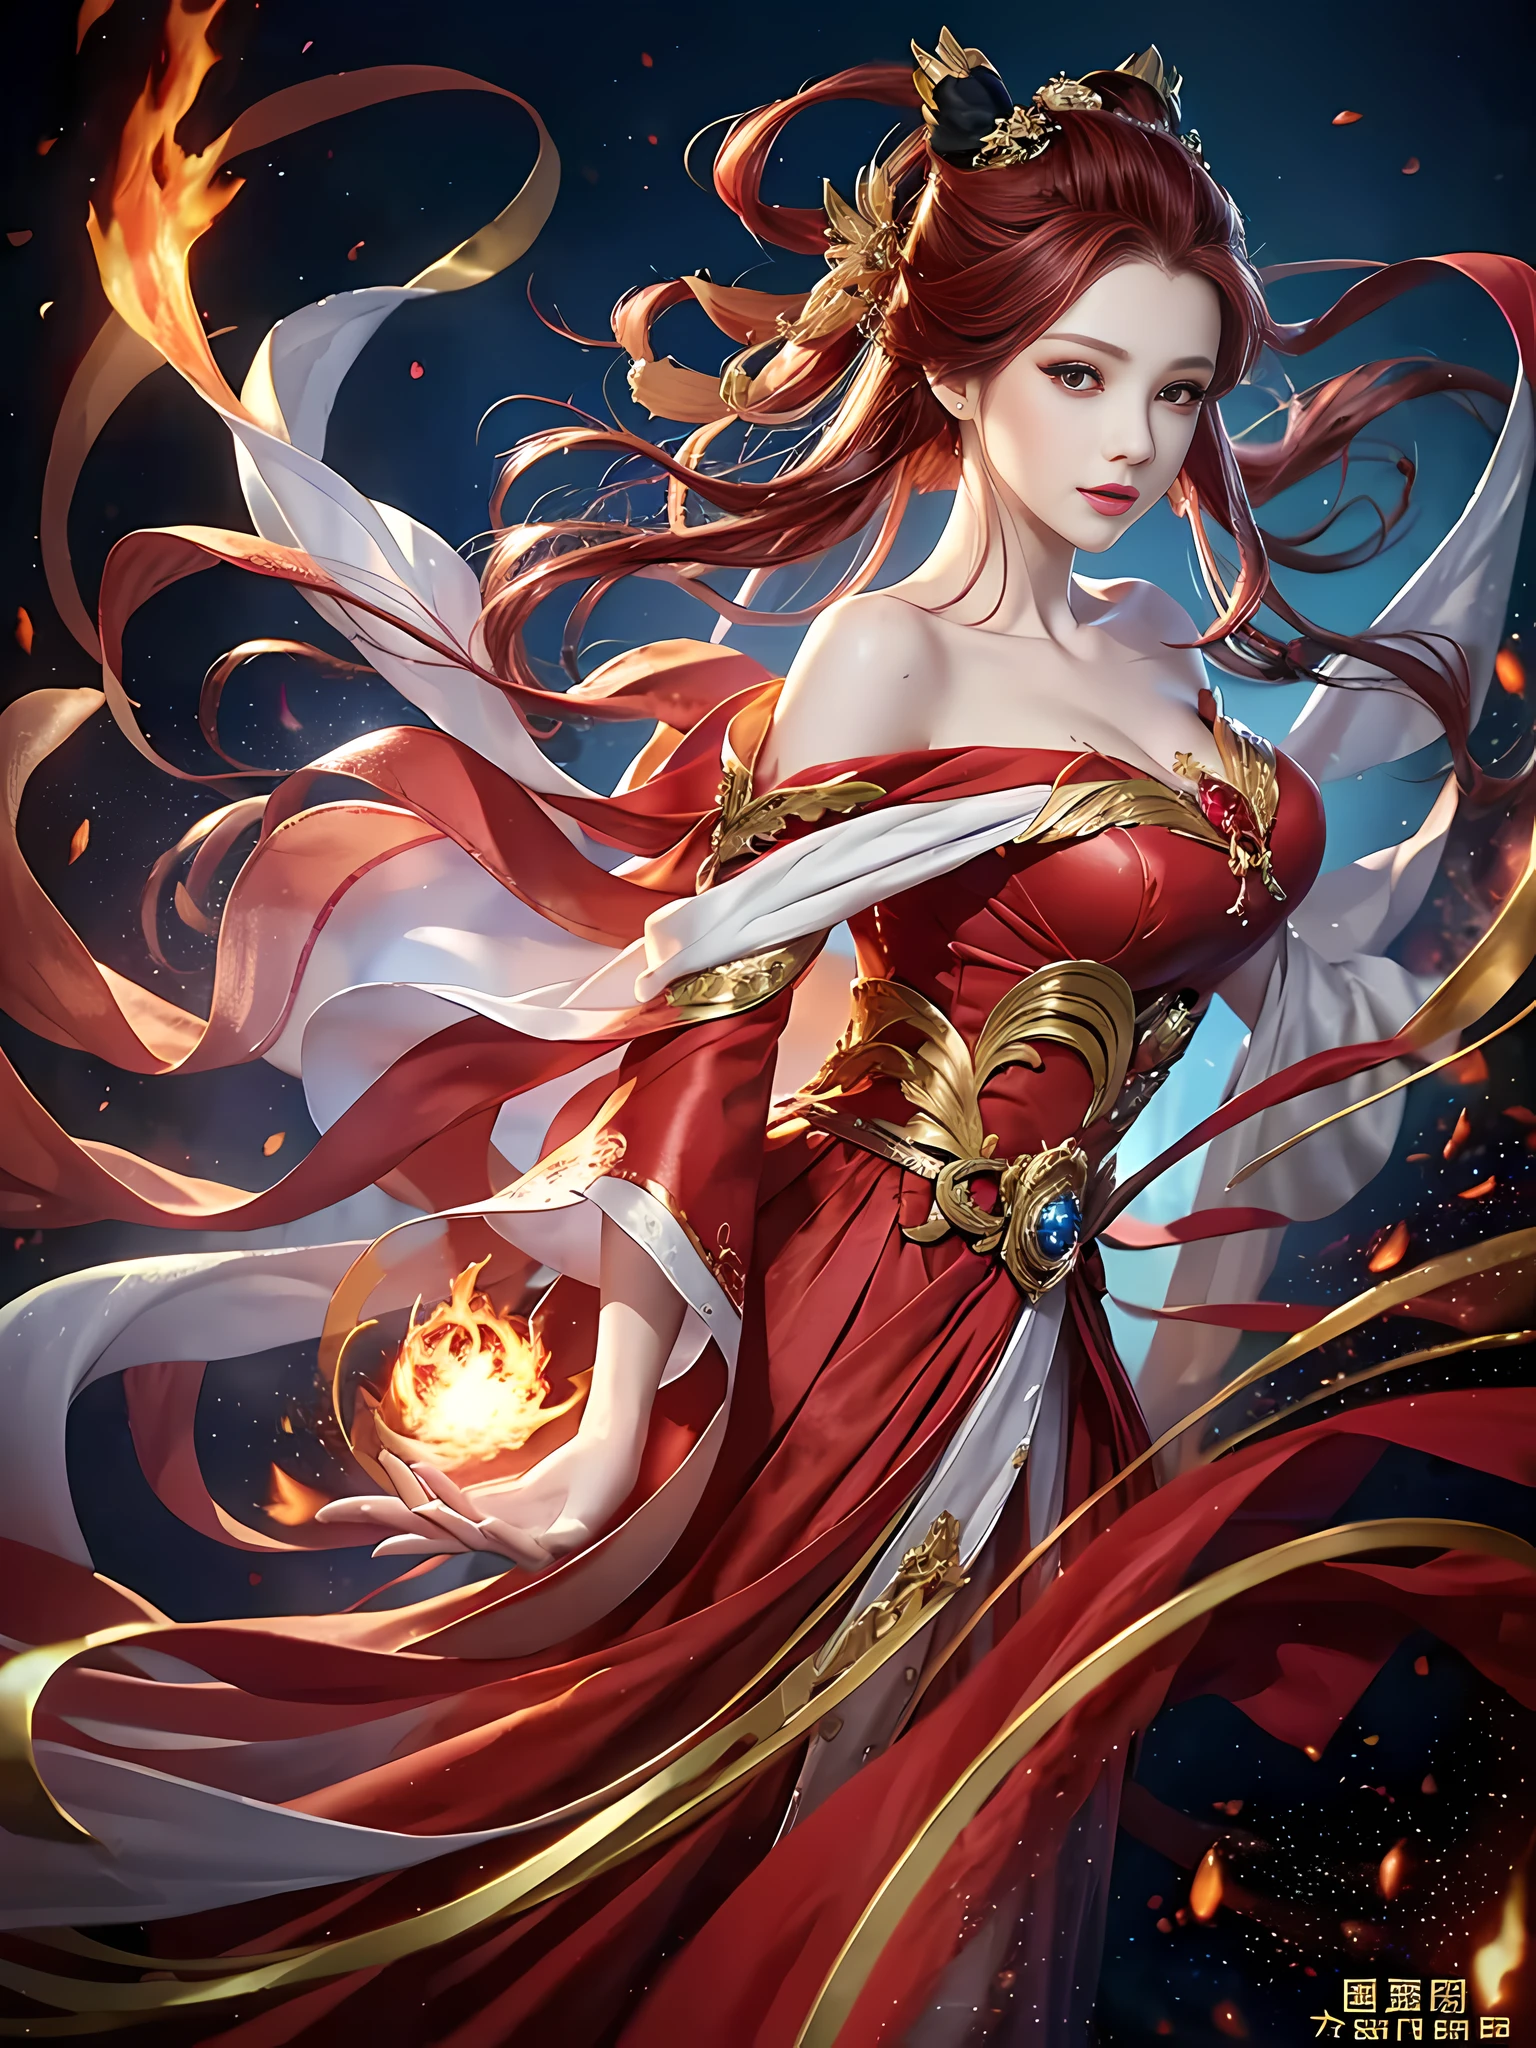 Masterpiece, top quality, best, official art, beautiful and aesthetic, long exposure: 1.2), smooth movement, charming pattern, 1 girl, (long skirt with sleeves: 1.3), ((red hair, red clothes, red eyes))), close-up of upper body, no shoulders, Chinese girl, blush, black lob hair, portrait, solo, close-up, gaze observer, detailed background, detailed face, (crystallineAI, crystalline theme:1.1), Elemental Fire Spirit, Spin Flame, Control Flame, Red Clothes, Dynamic Pose, Floating Particles, Ethereal Power, Flame, Vapor, ((Ring of Fire in the background)), Ethereal Atmosphere --Naji5 --AR4:3 --S750 --Q2 --v6